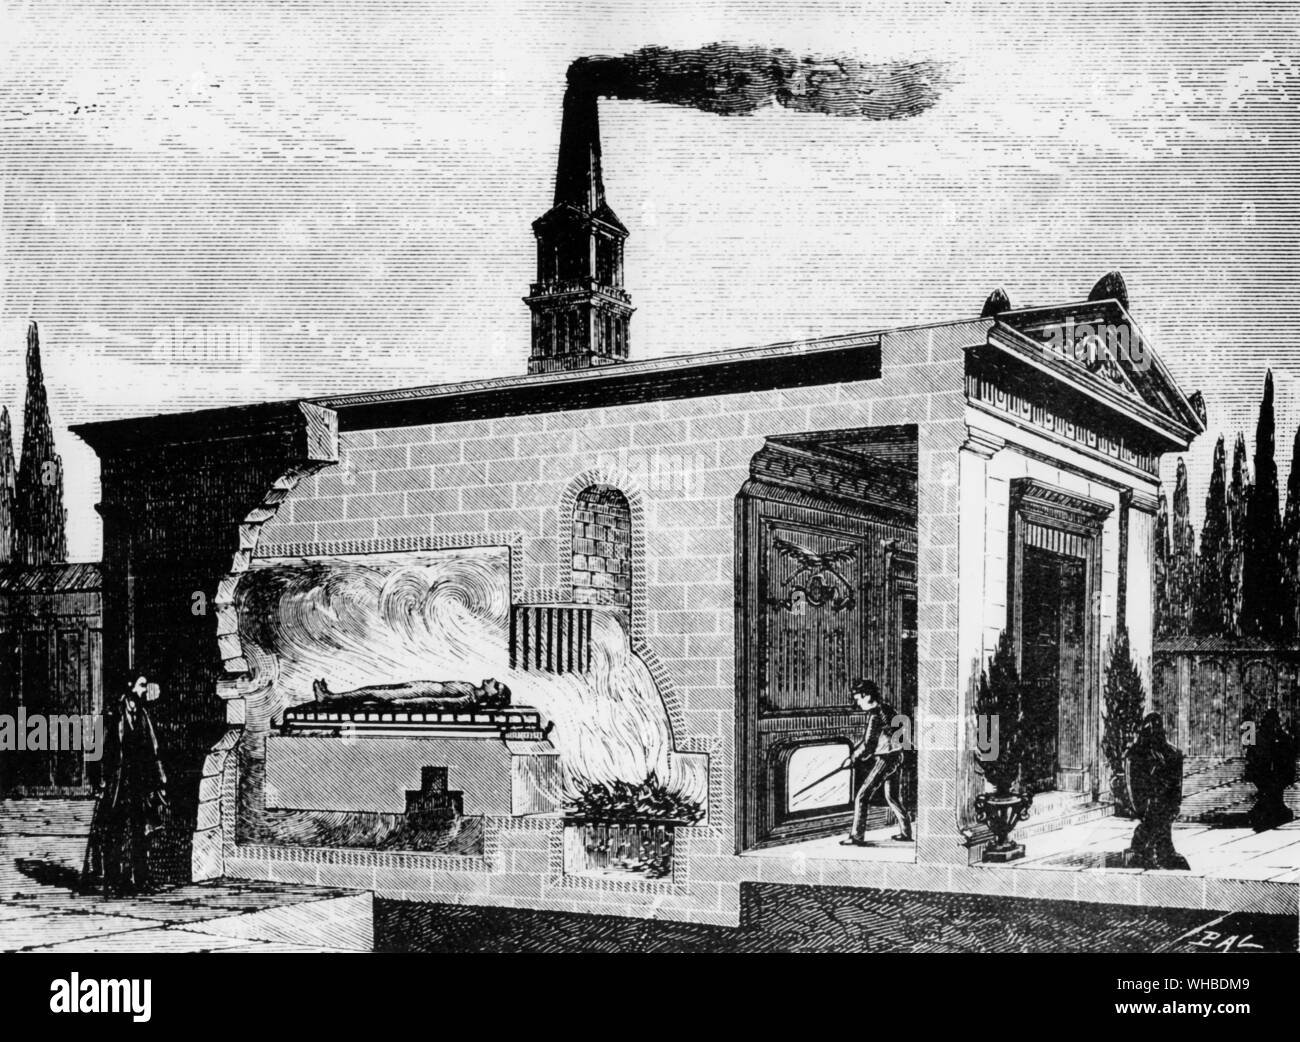 Milan Crematorium established by Albert Keller (born in Zurich, Switzerland) in 1875. The first person to be cremated there was Keller himself in 1876 - he failed to see the realization of the project during his own lifetime.. Stock Photo